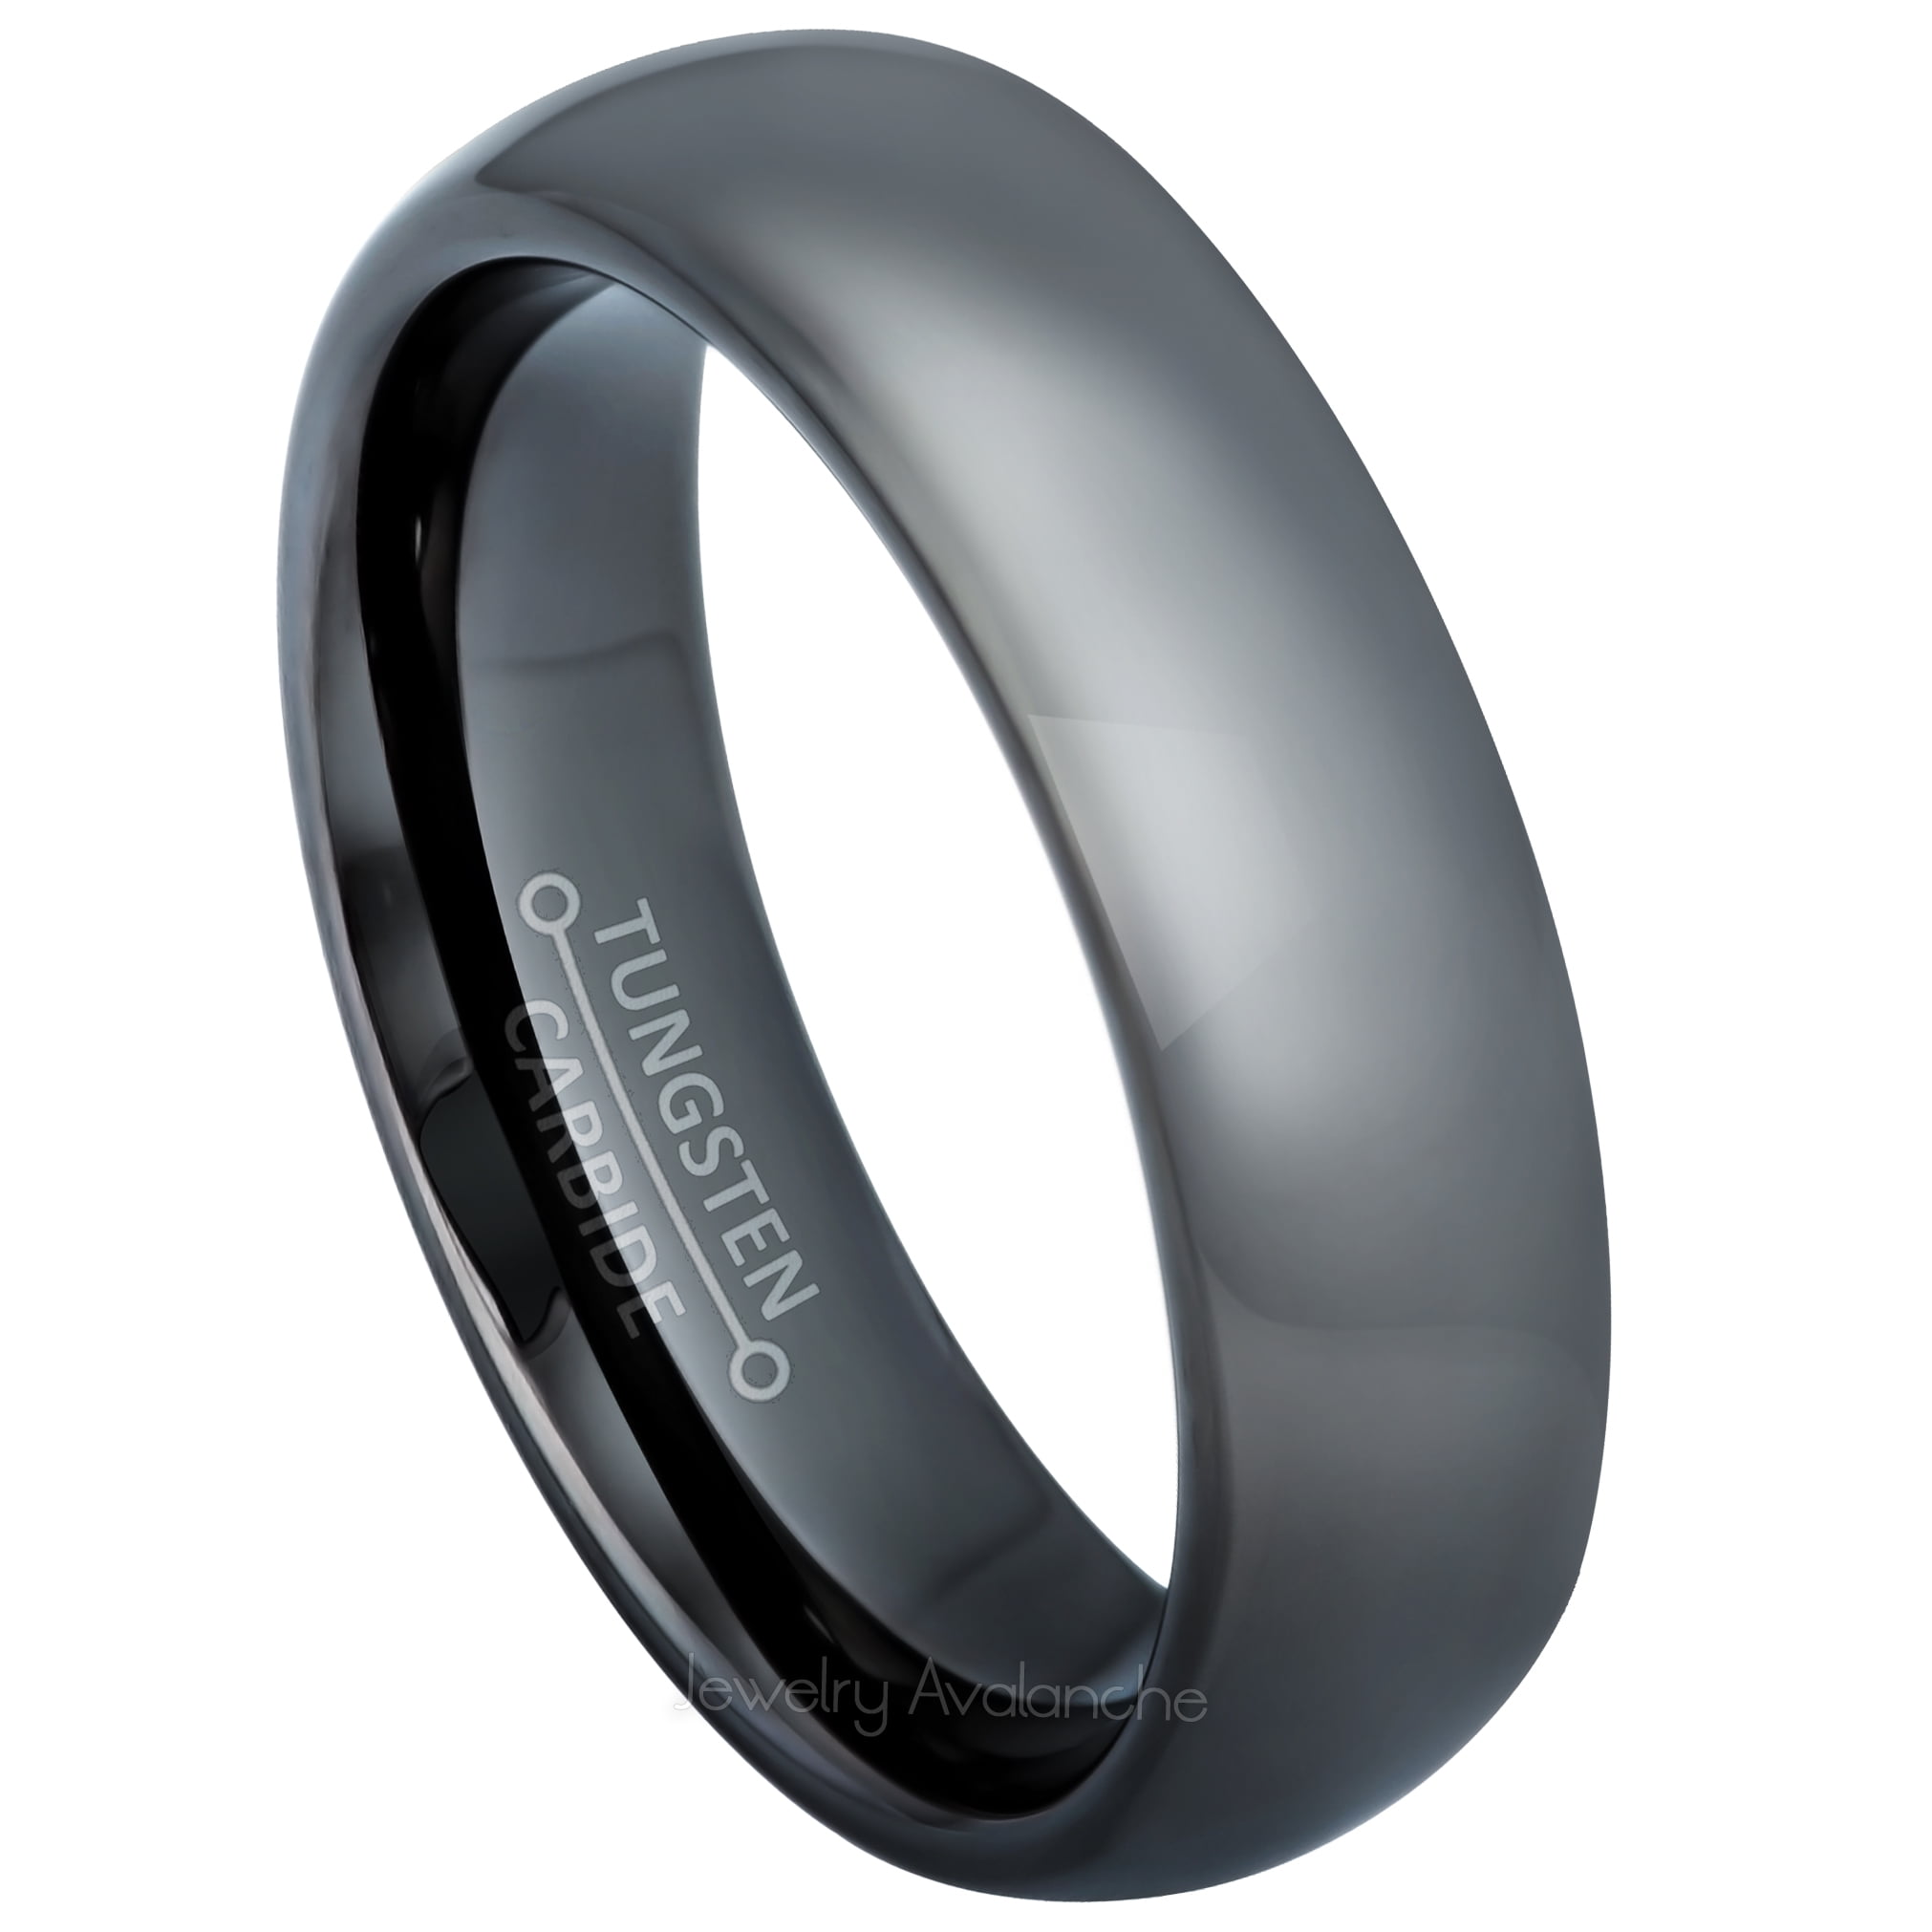 Wedding Band and Anniversary Ring Designed For Maximum Comfort Fit For Men And Women Use Size 6.5 Black Tungsten Guns and Skull Ring 8mm